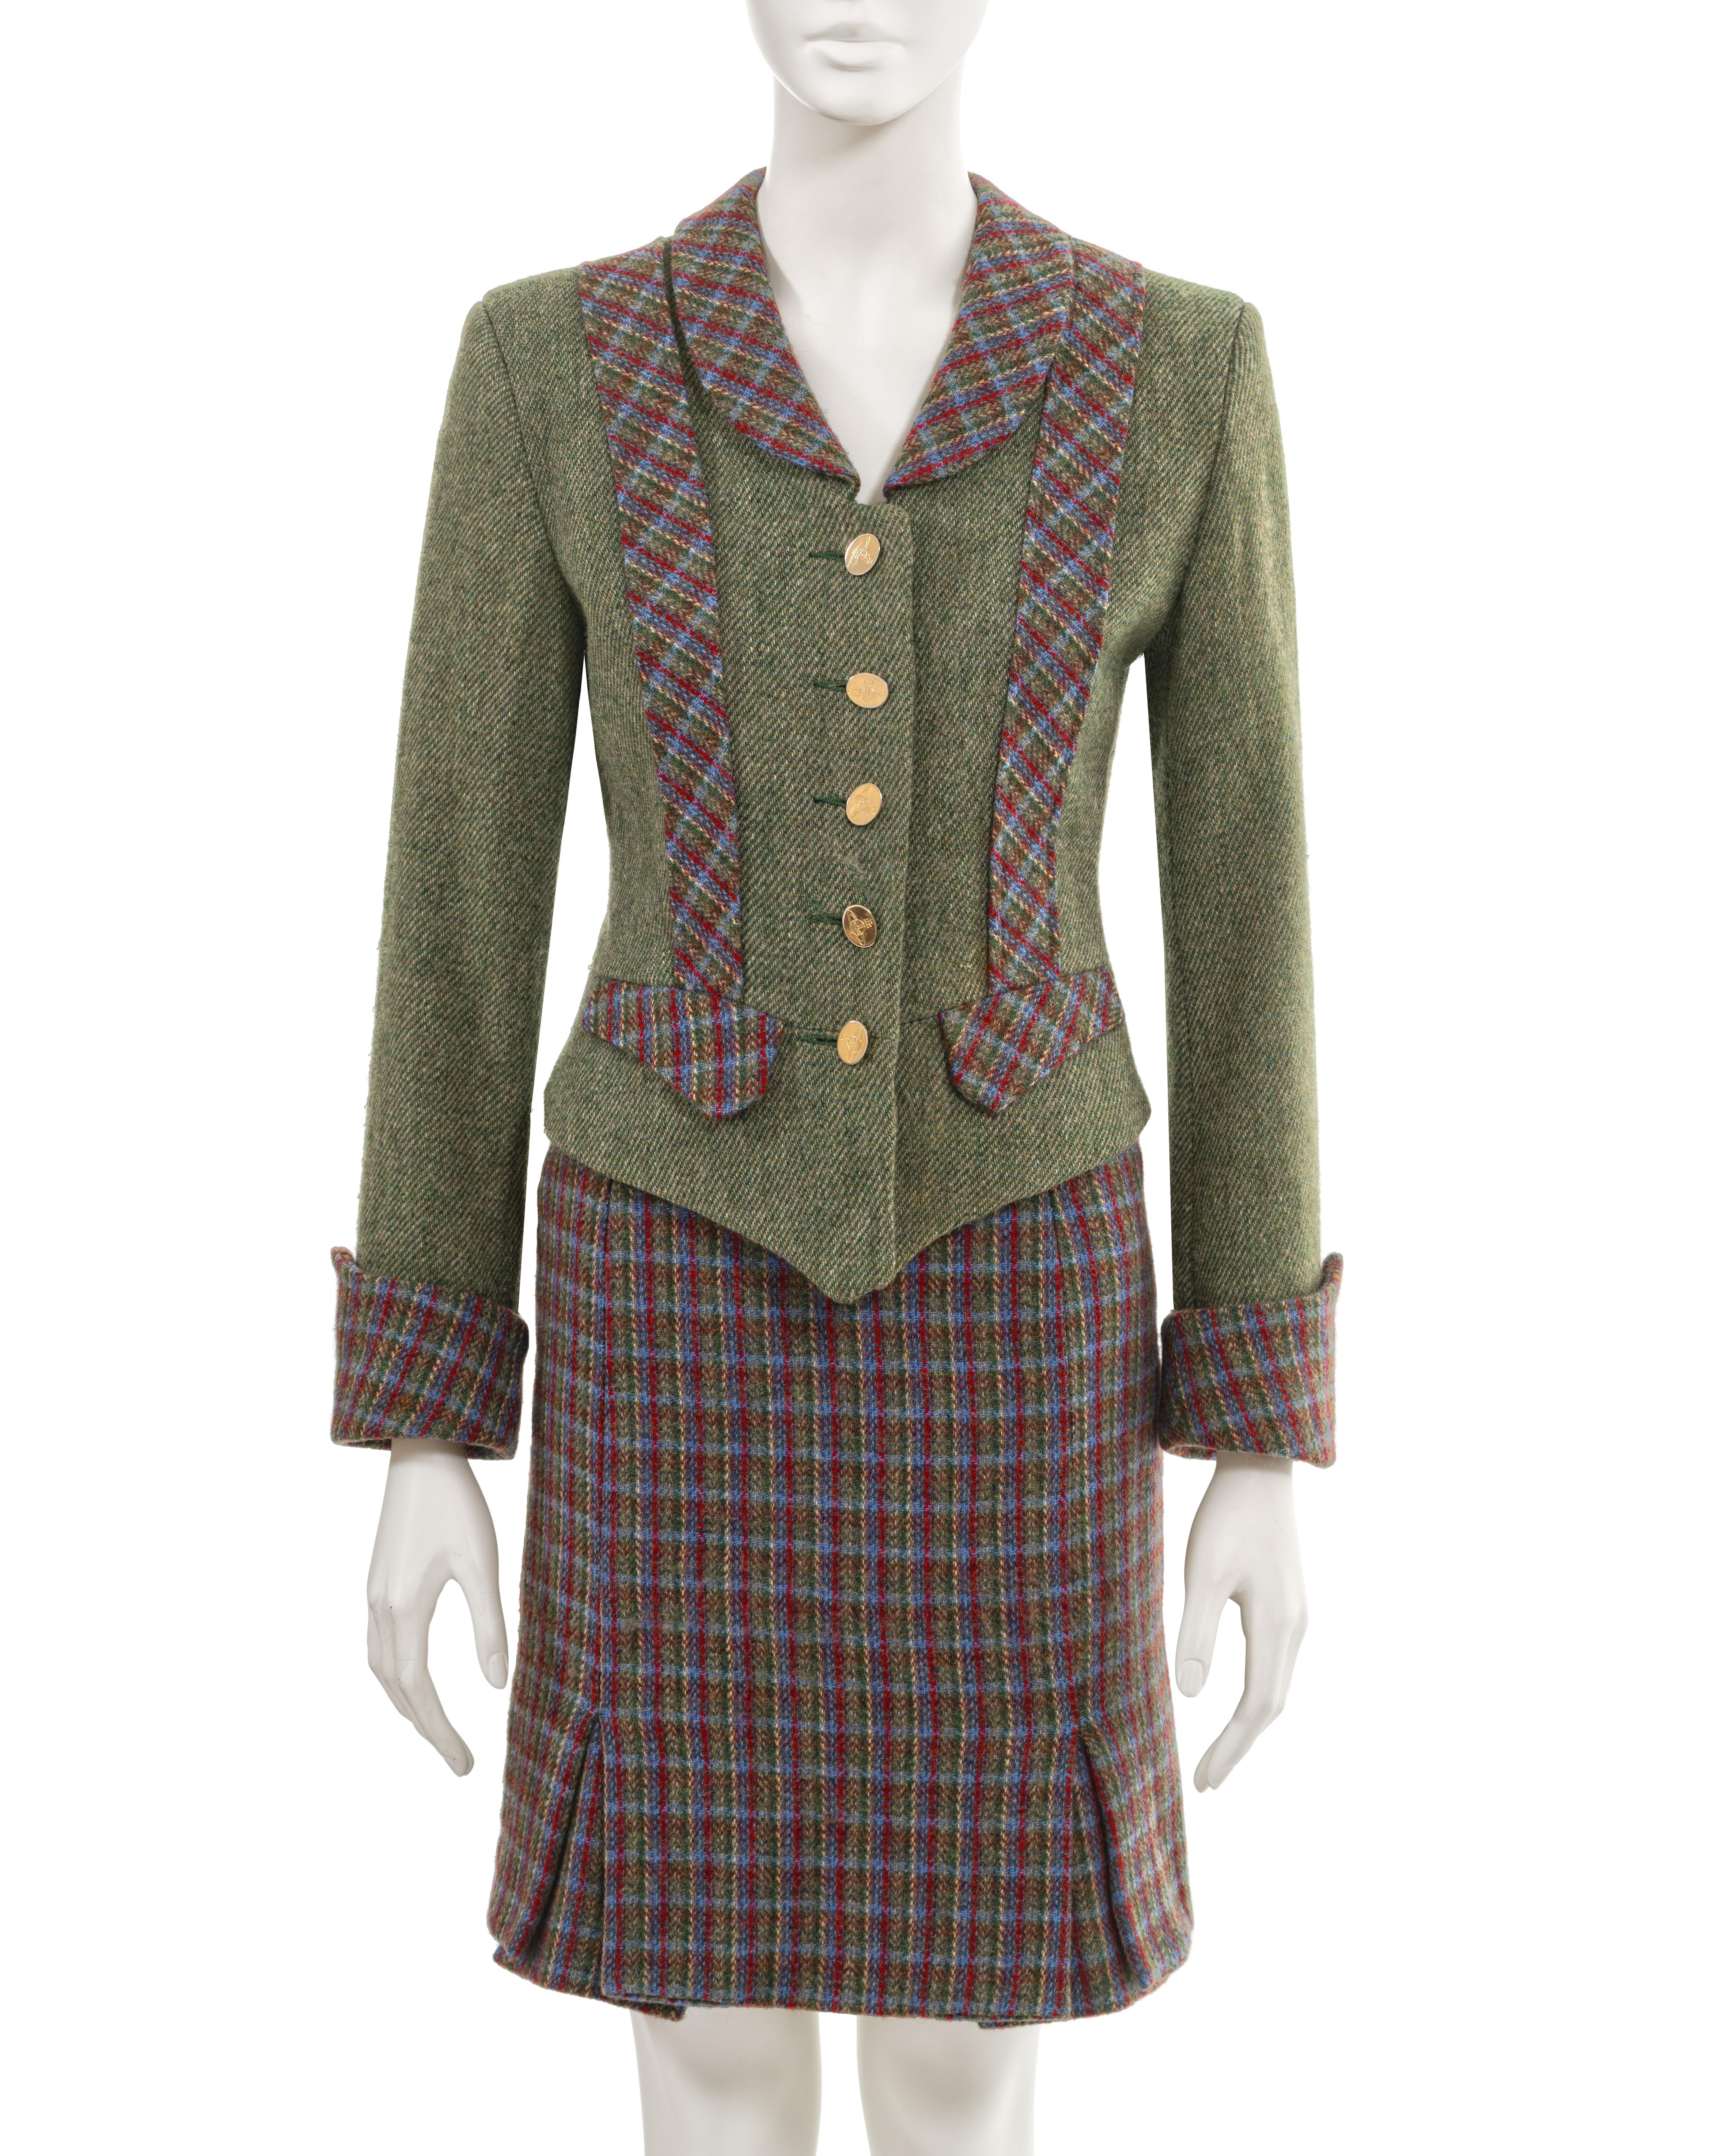 Vivienne Westwood 'Time Machine' tartan wool skirt suit, fw 1988 In Excellent Condition For Sale In London, GB